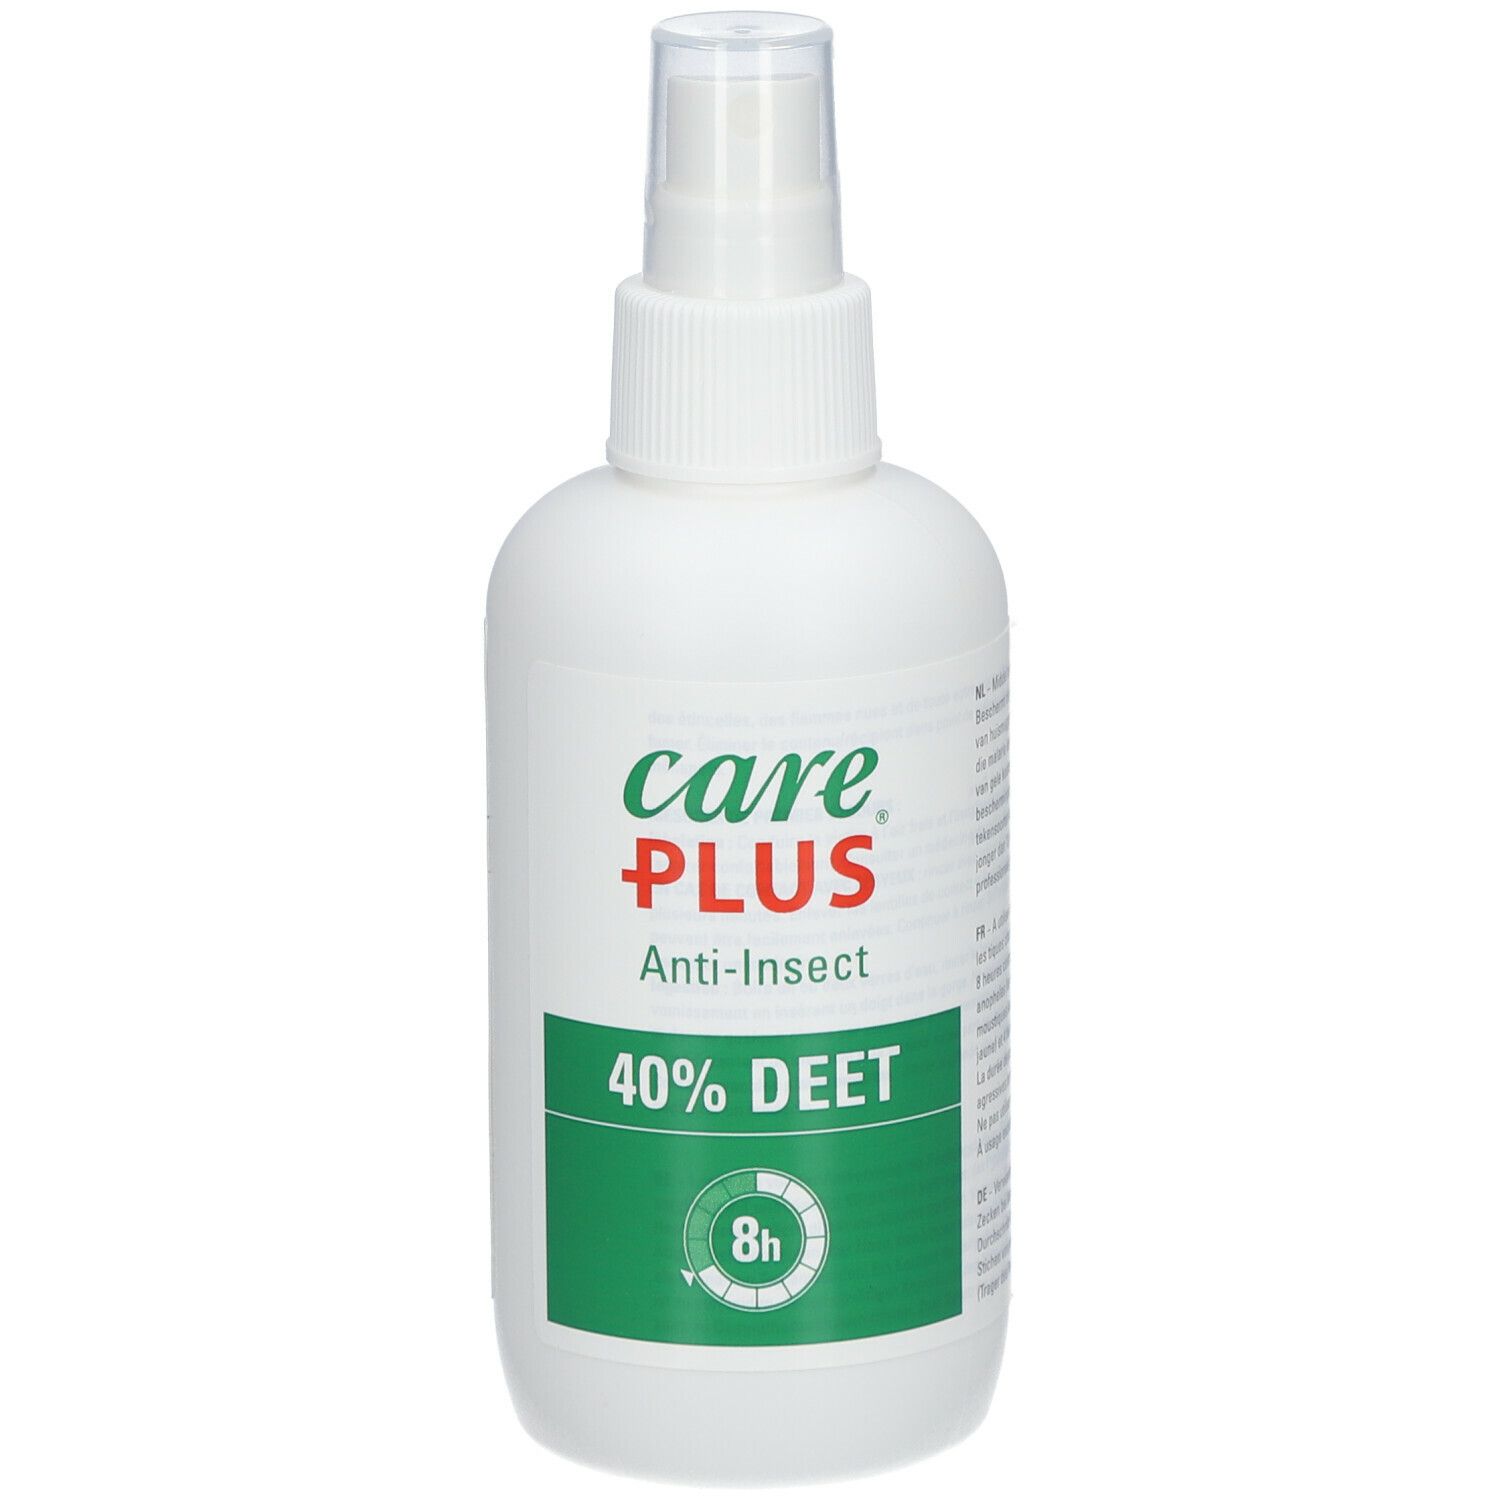 Care Plus Anti-Insect Spray 40% Deet